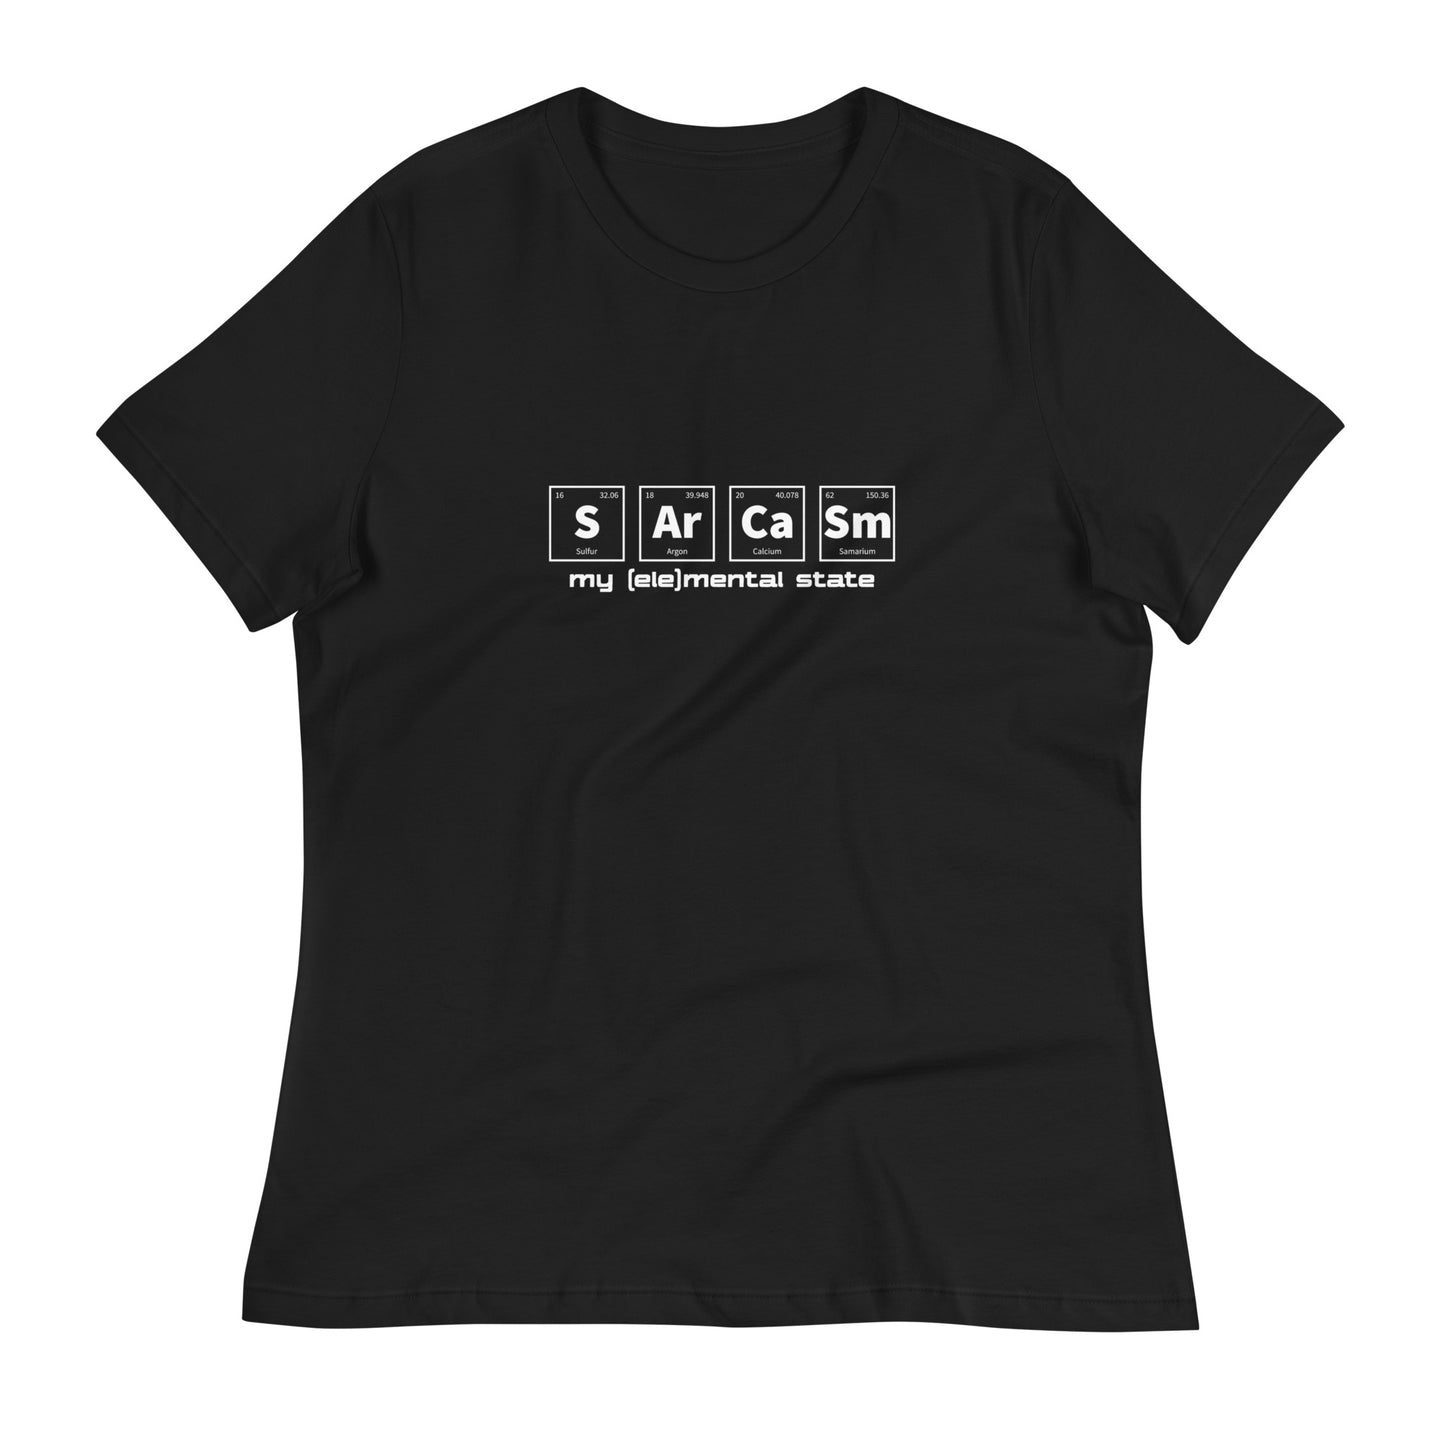 Black women's relaxed fit t-shirt with graphic of periodic table of elements symbols for Sulfur (S), Argon (Ar), Calcium (Ca), and Samarium (Sm) and text "my (ele)mental state"